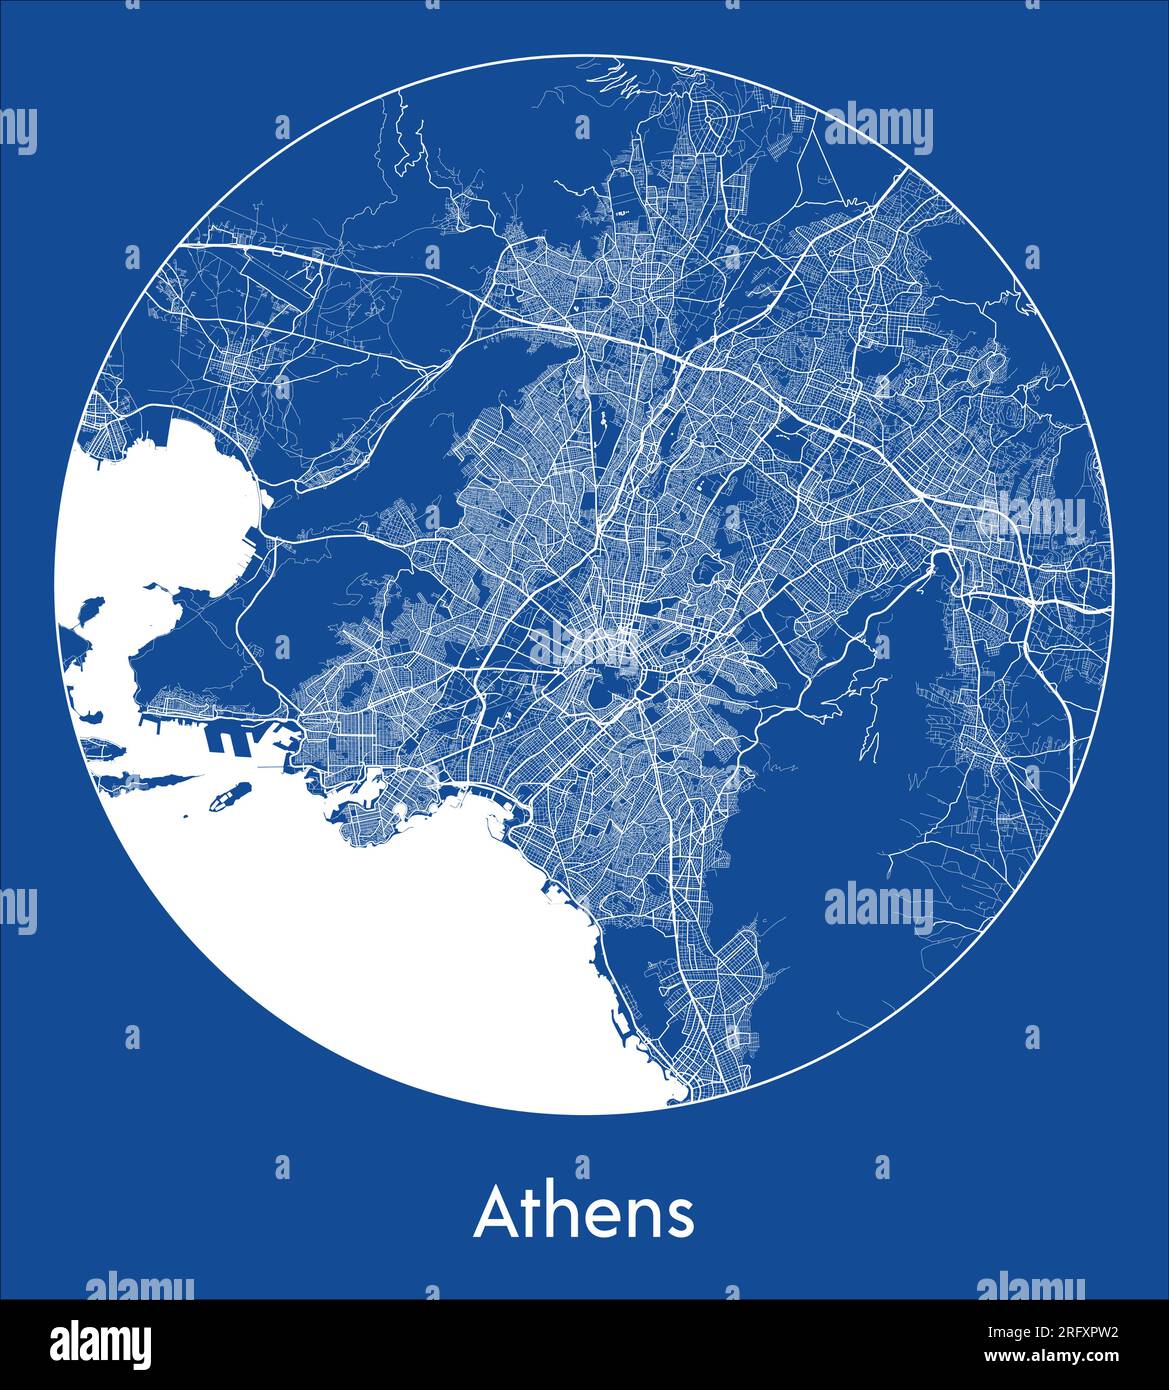 City Map Athens Greece Europe blue print round Circle vector illustration Stock Vector